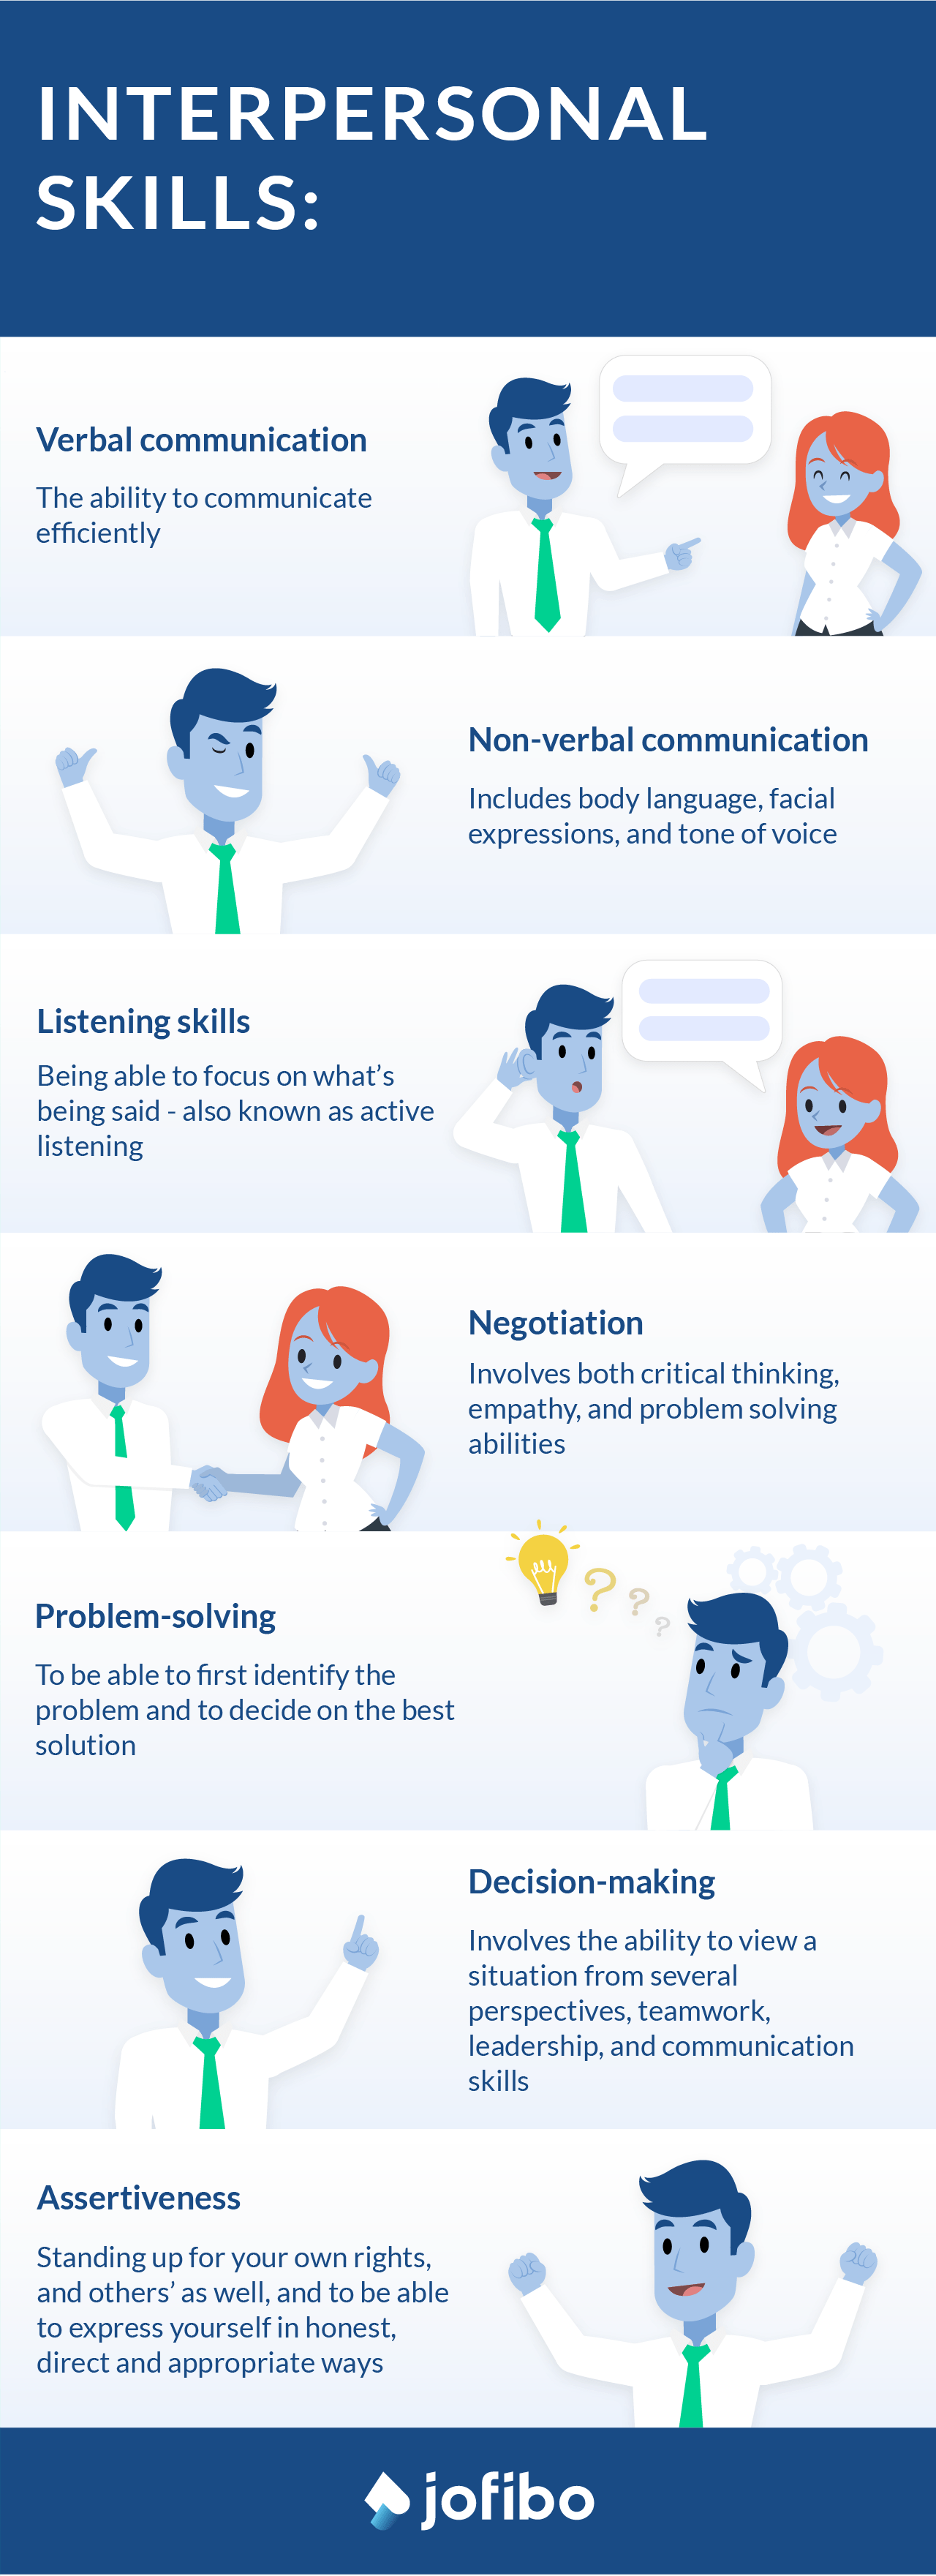 A list of examples of interpersonal skills with illustrations